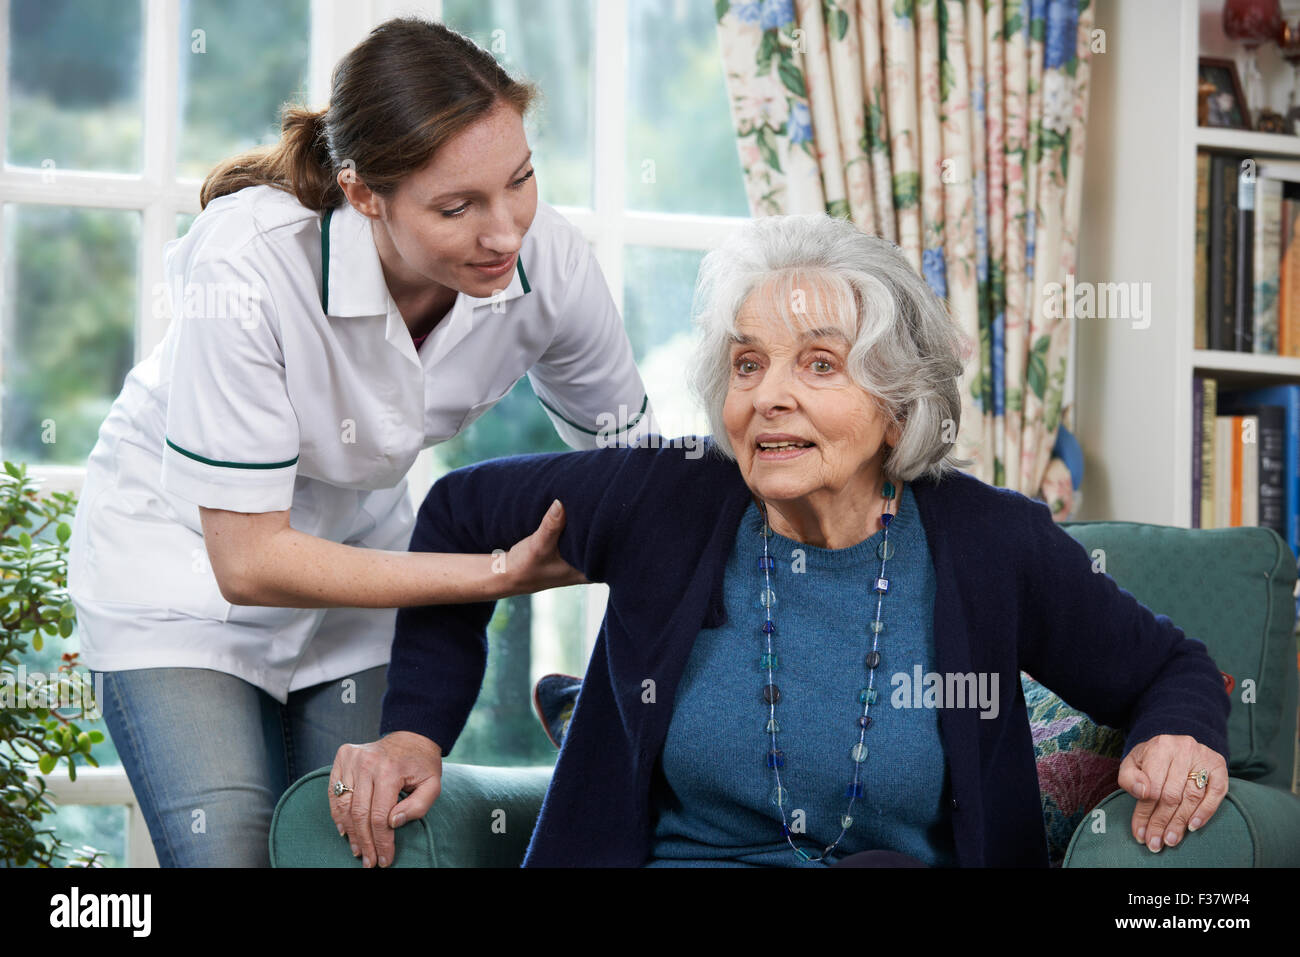 Care Worker Helping Senior Woman To Get Up Out Of Chair Stock Photo